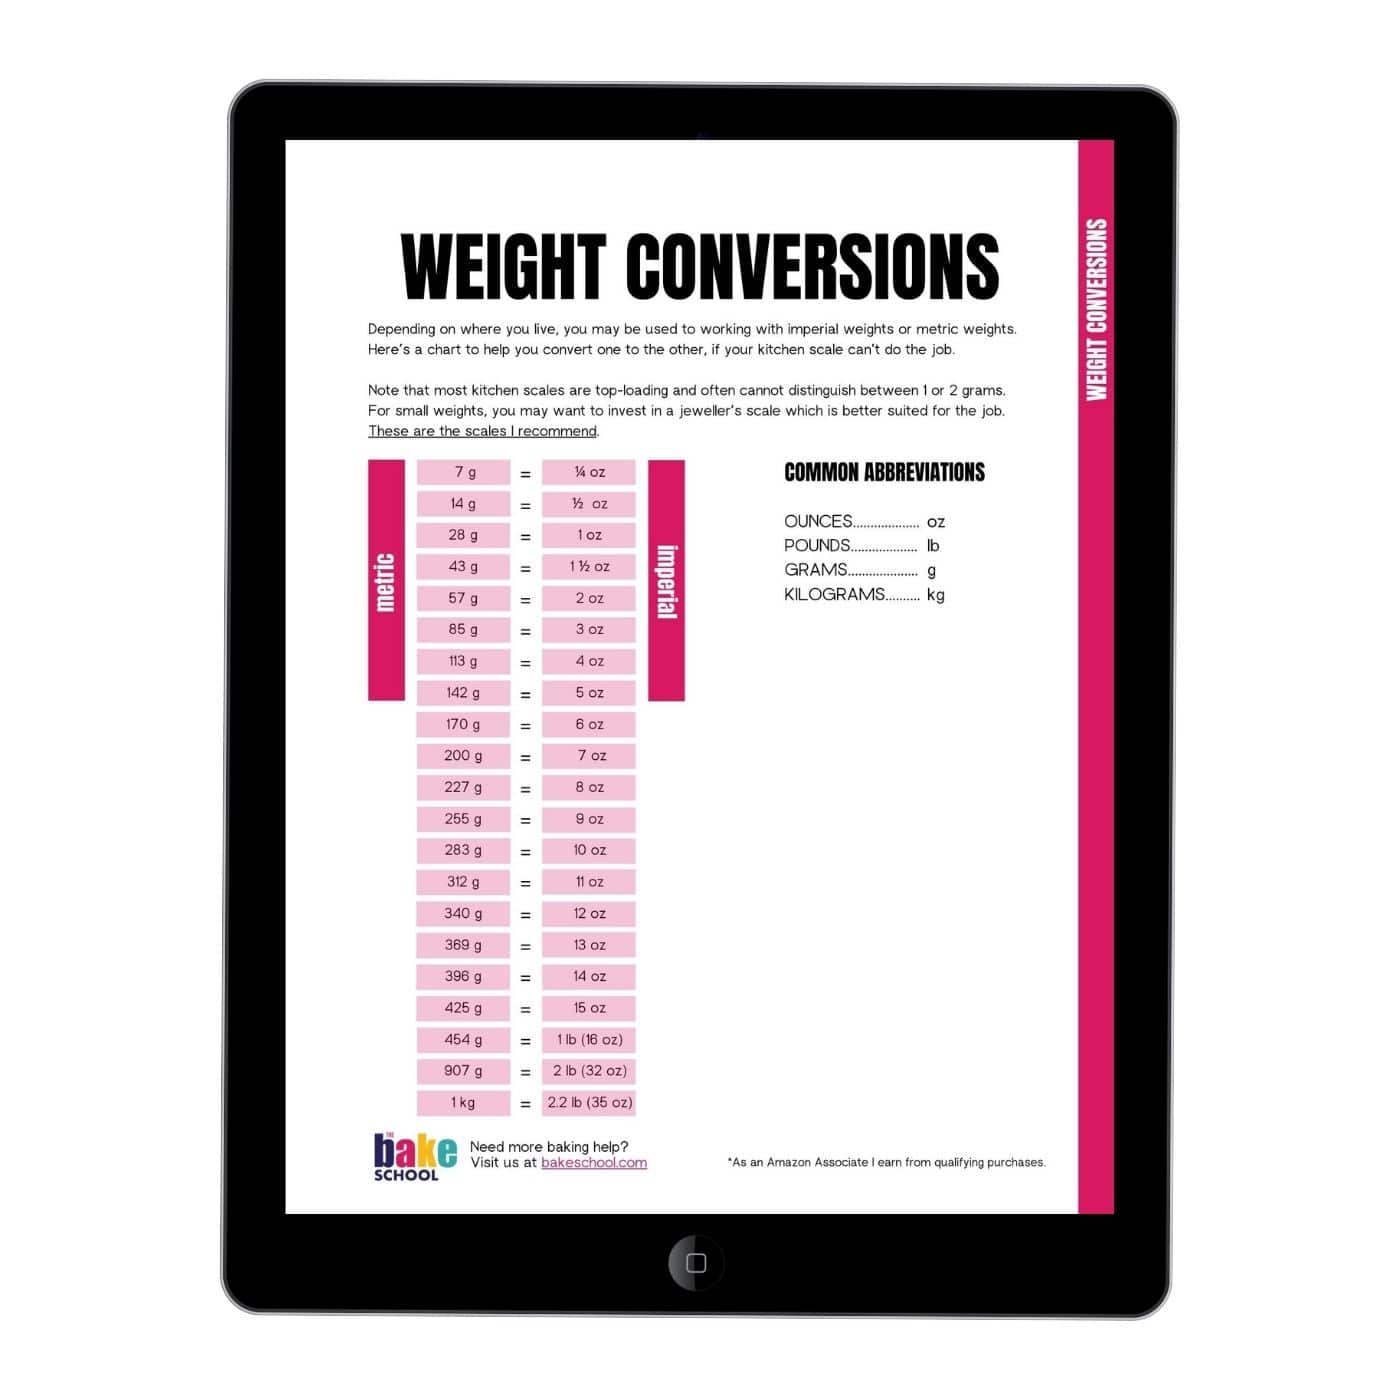 Weight conversions chart from metric to Imperial weights displayed on a tablet.